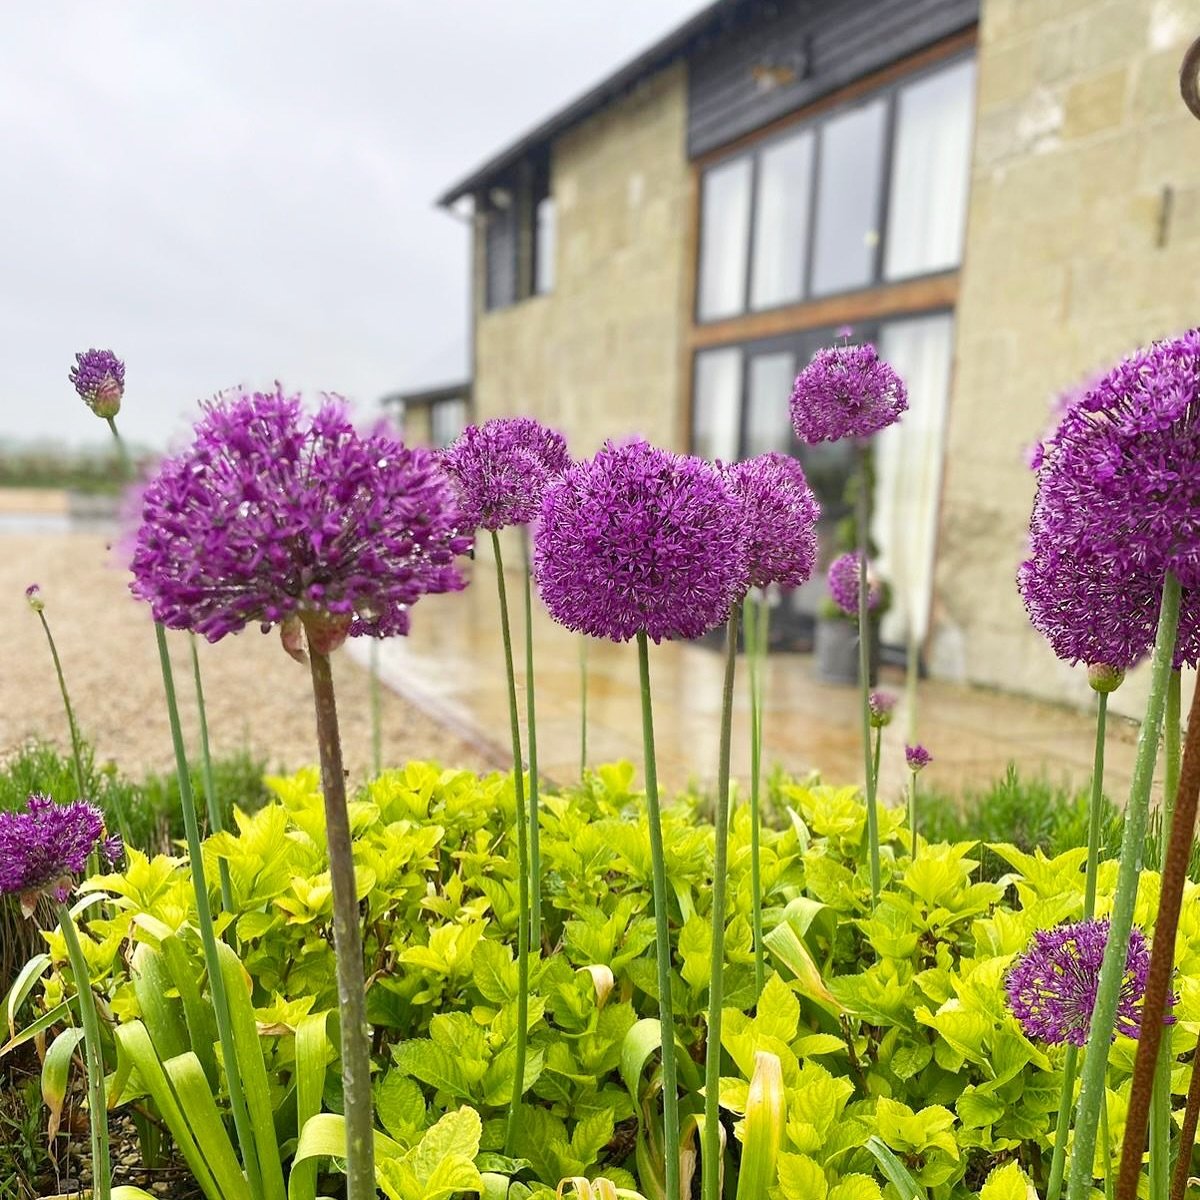 Here they finally are! The alliums have arrived after a burst of sun and a few showers. In other exciting news we placed an order for 20 trees that will be planted around the grounds as soon as they arrive. Lots to look forward to over the coming yea